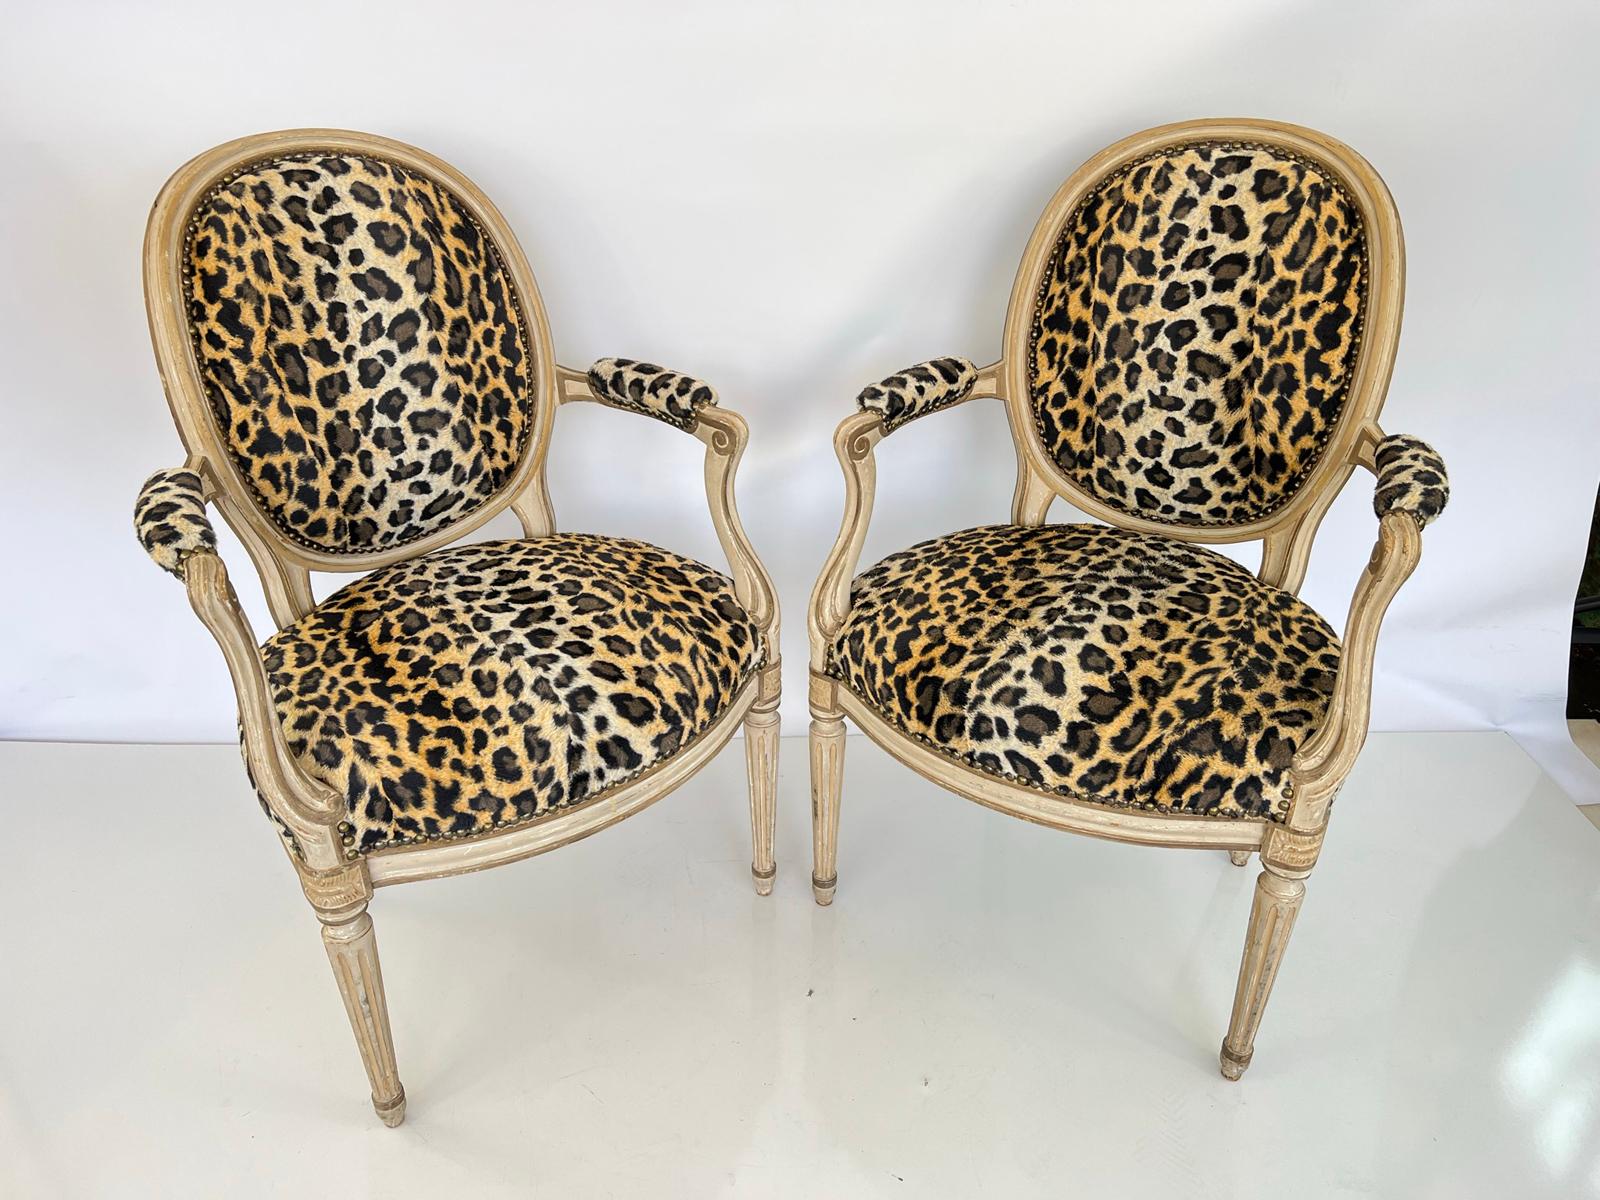 Pair of French Fauteuils, Upholstered in Faux Cheetah Print For Sale 3